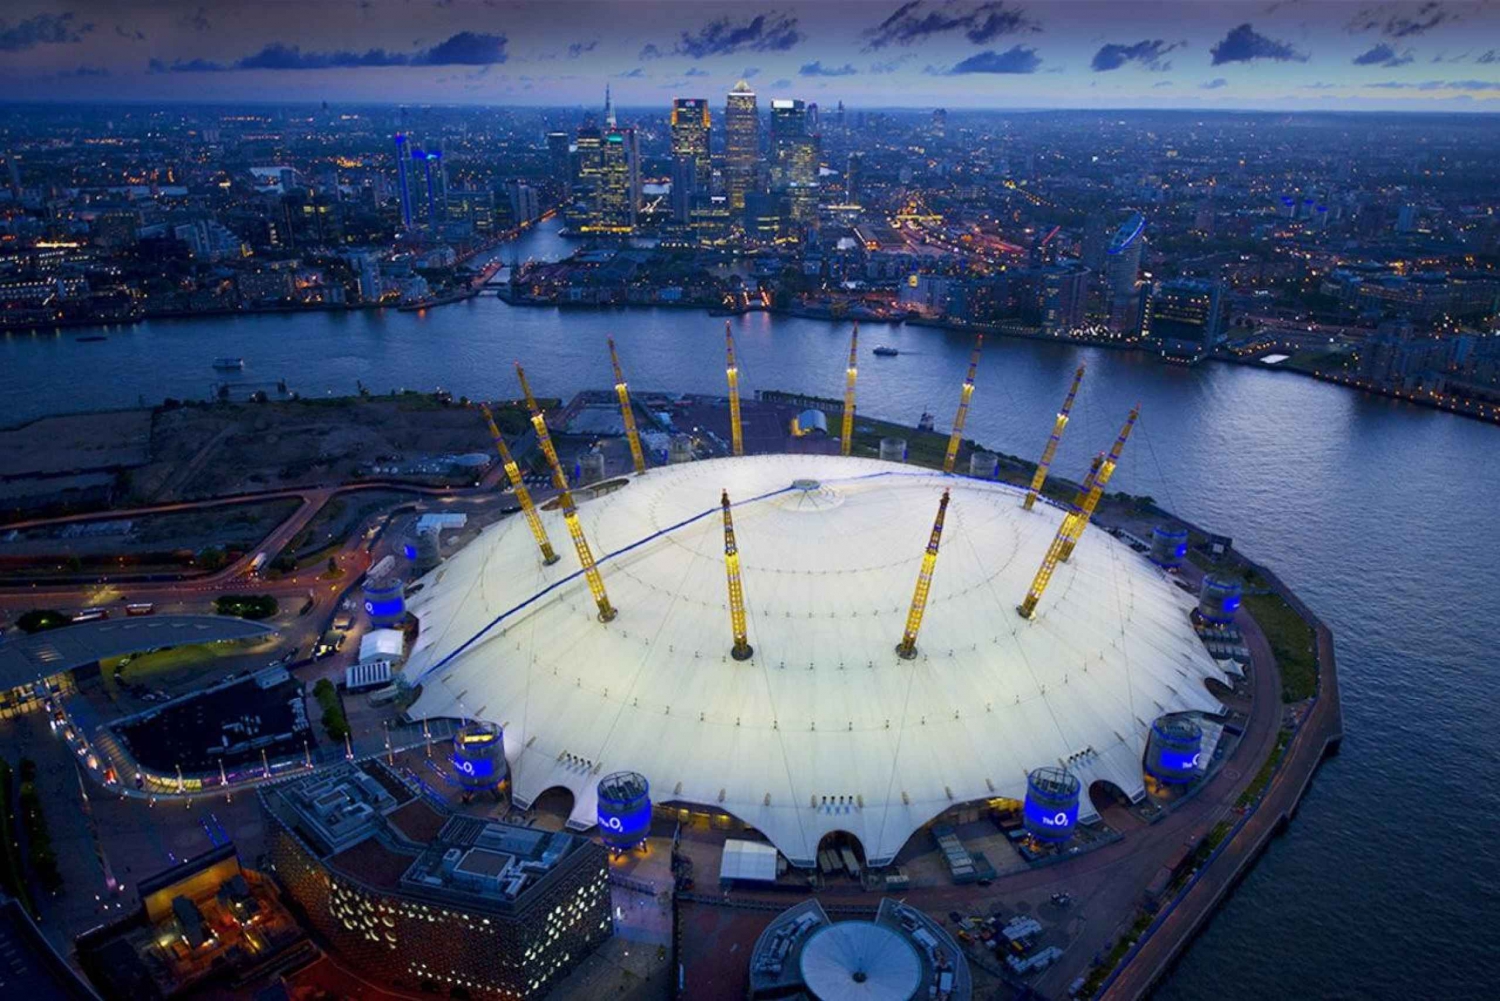 London: Climb The O2 Arena & Best of Westminster Tour